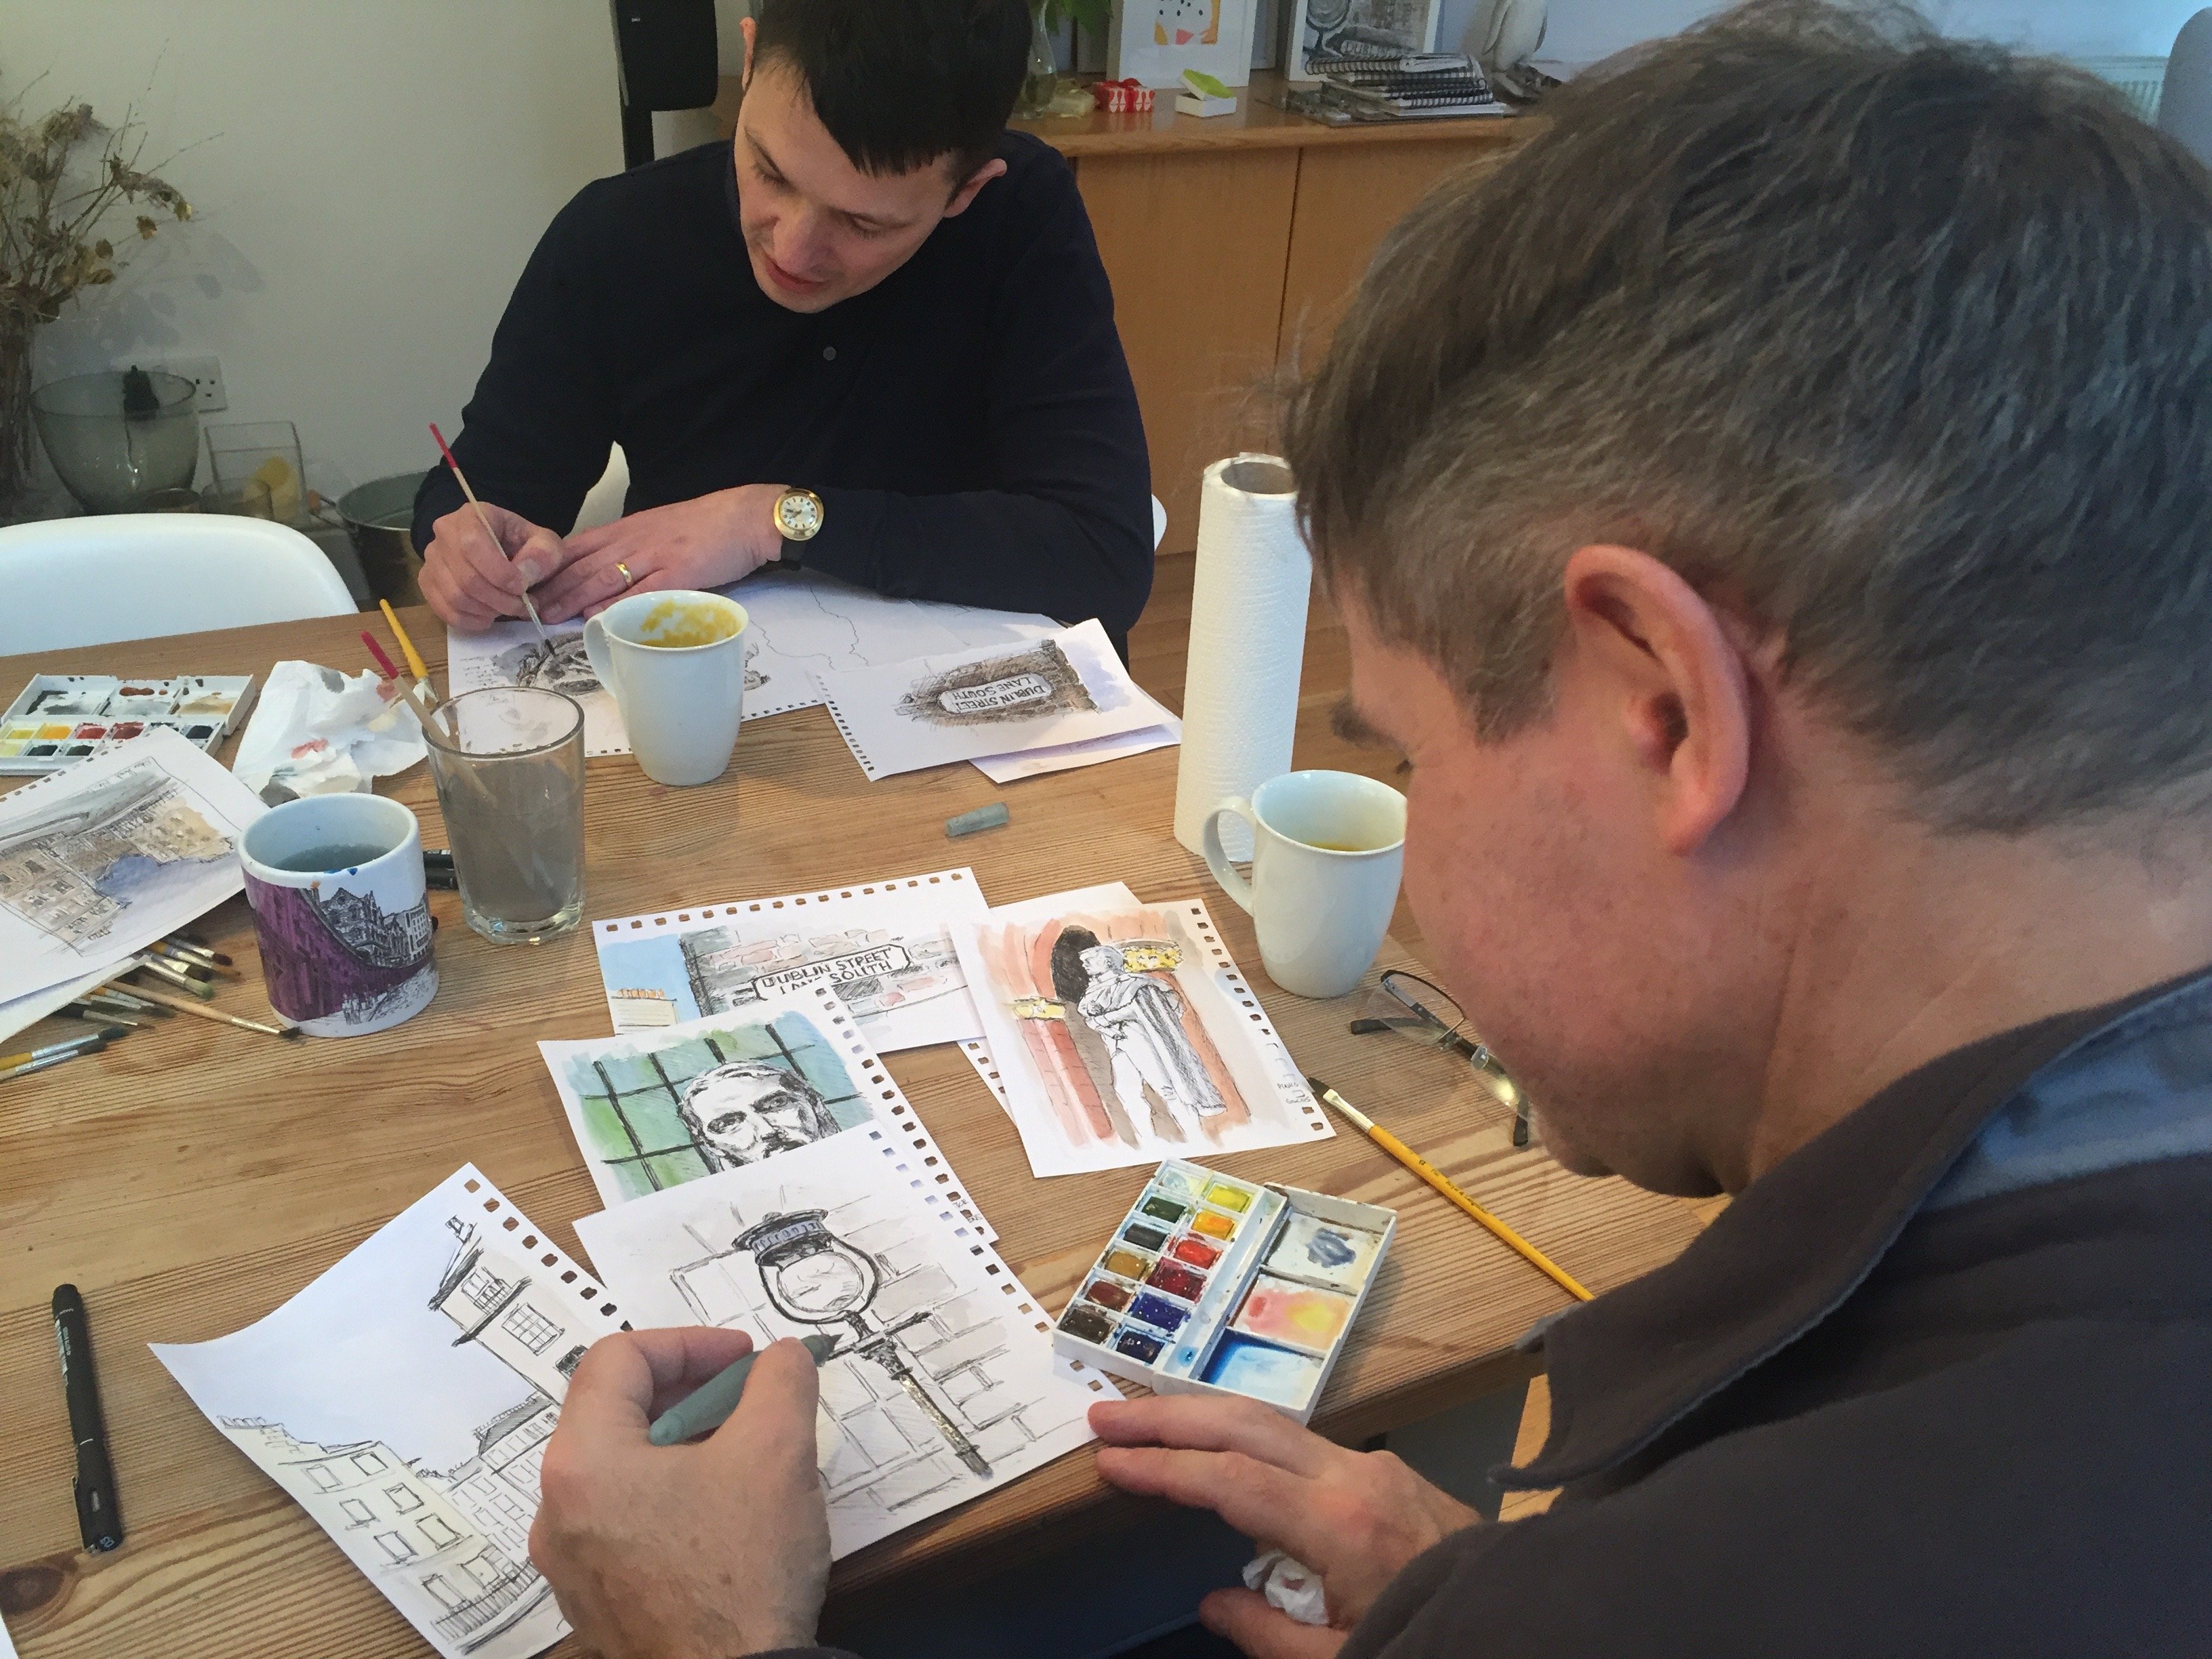 One-to-one sketching tour with the Edinburgh Sketcher